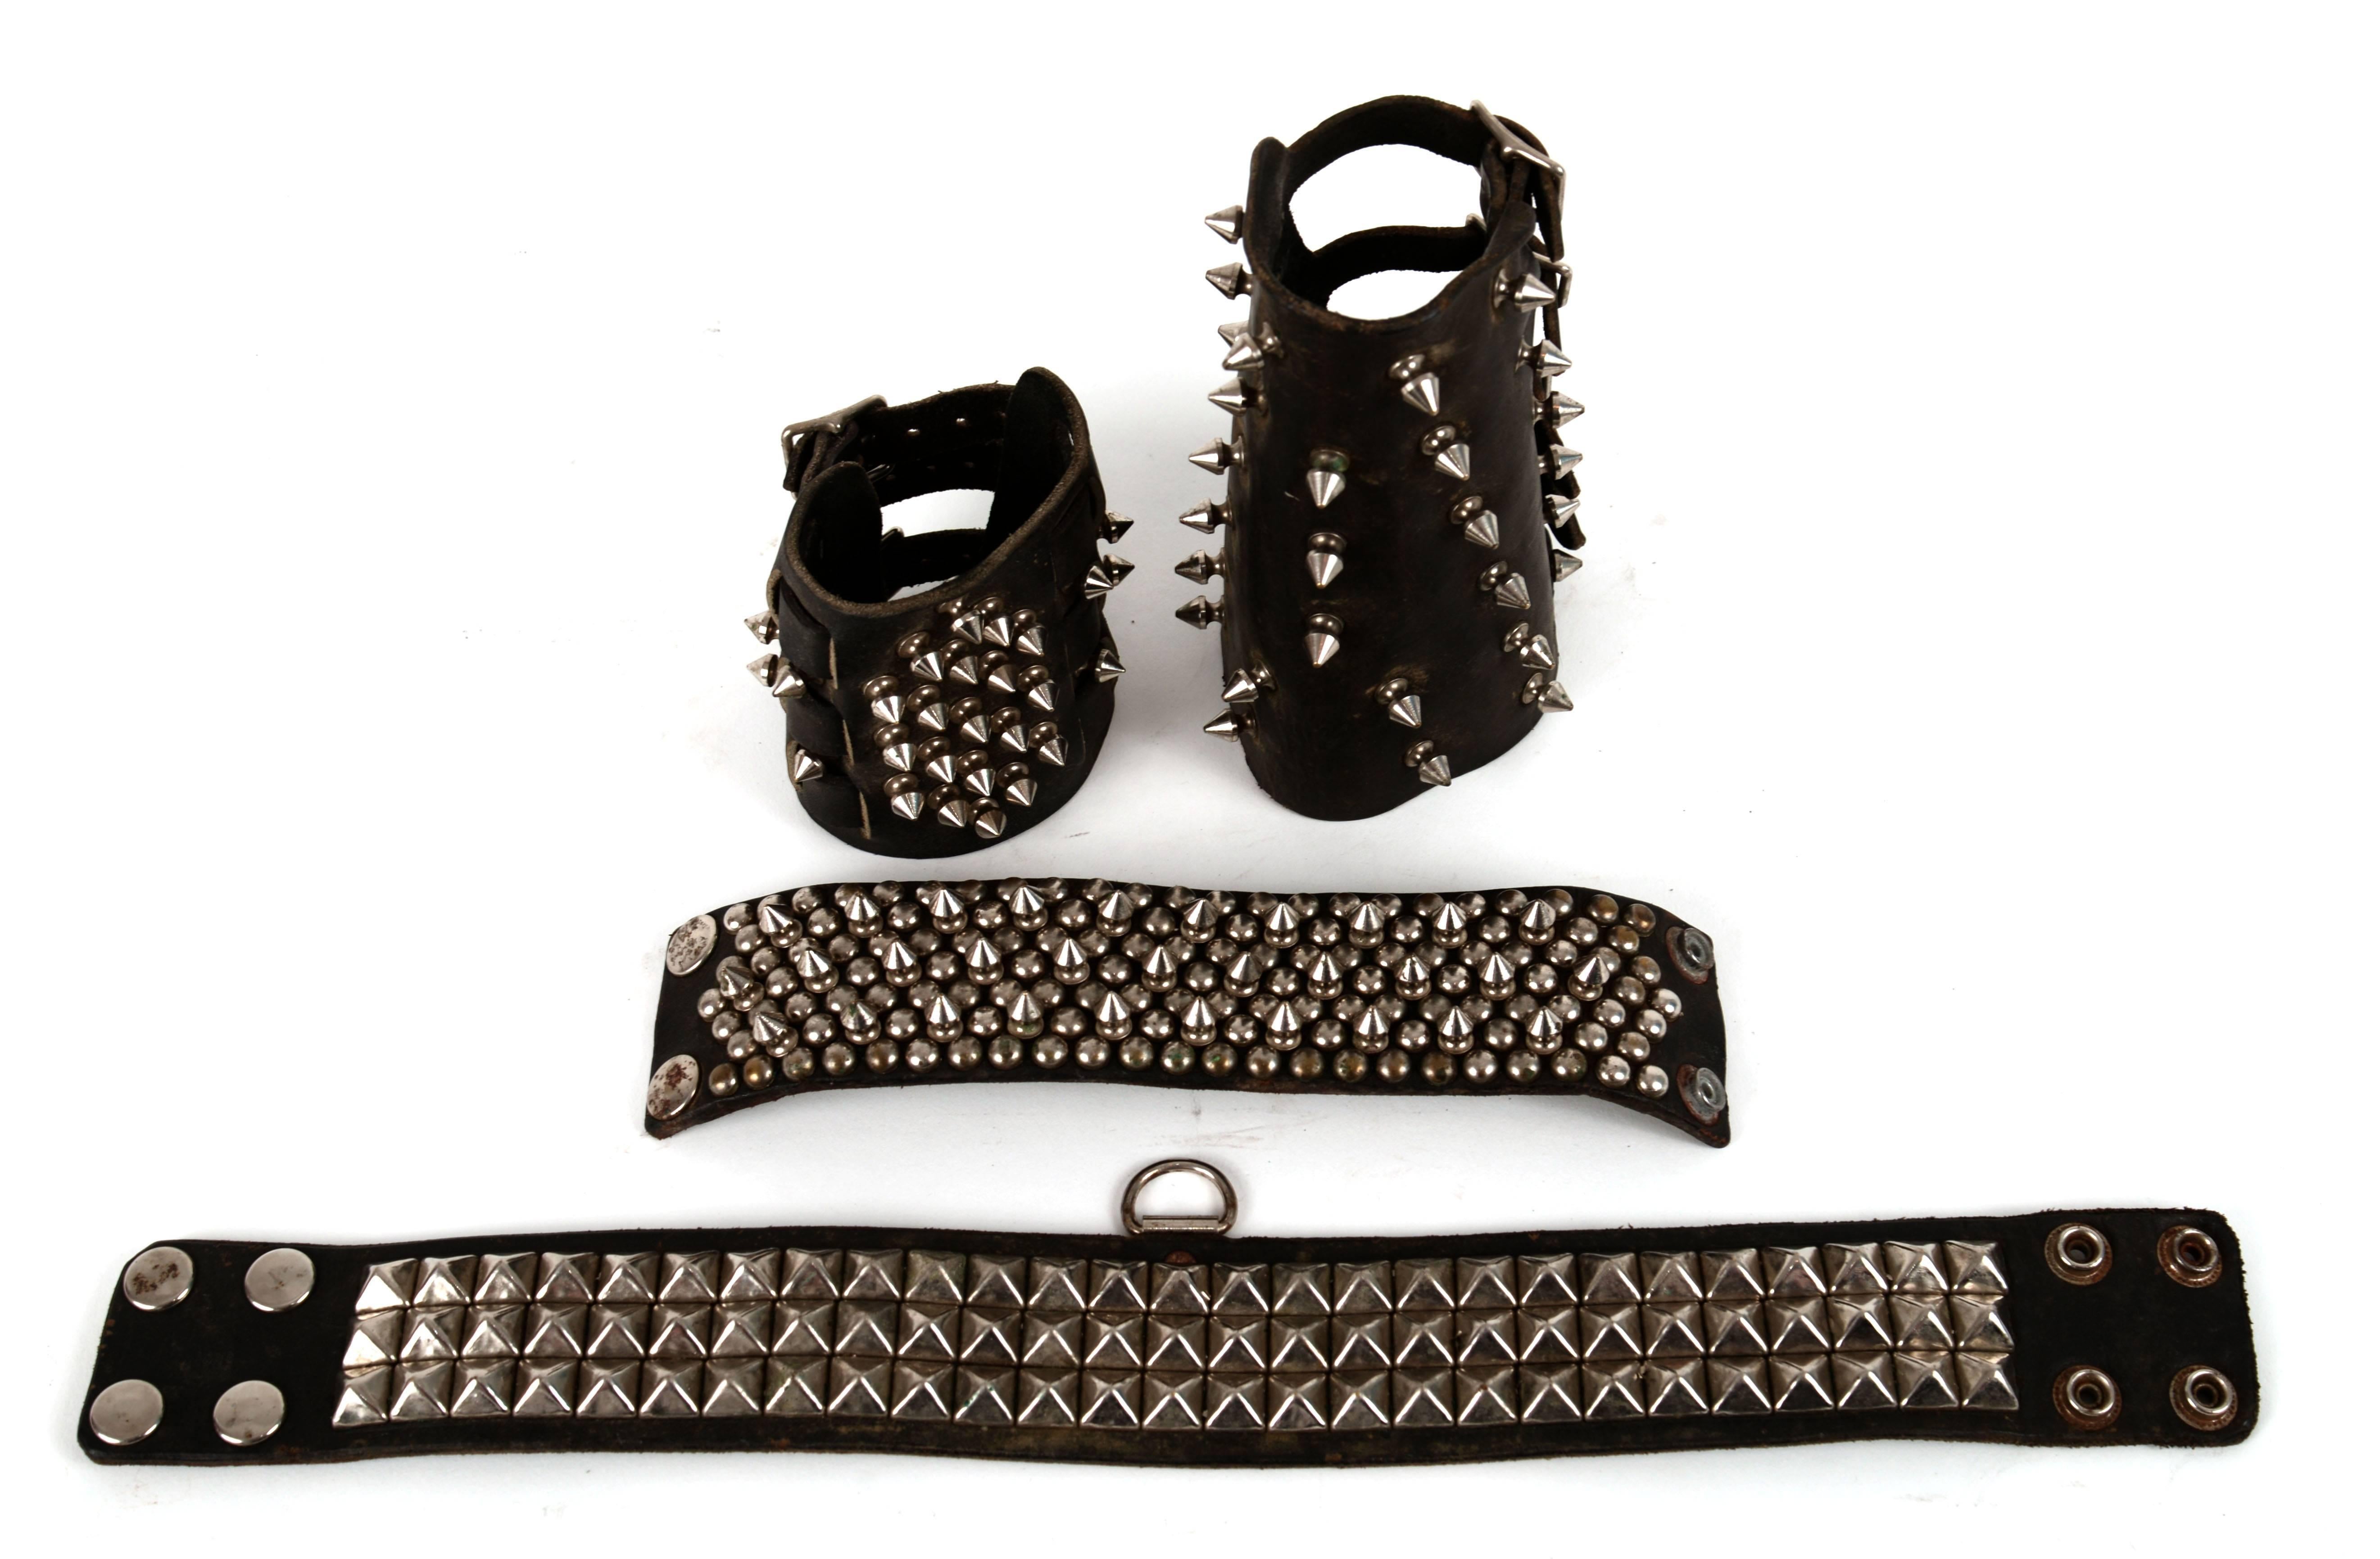 American Studded Leather Accessories For Sale